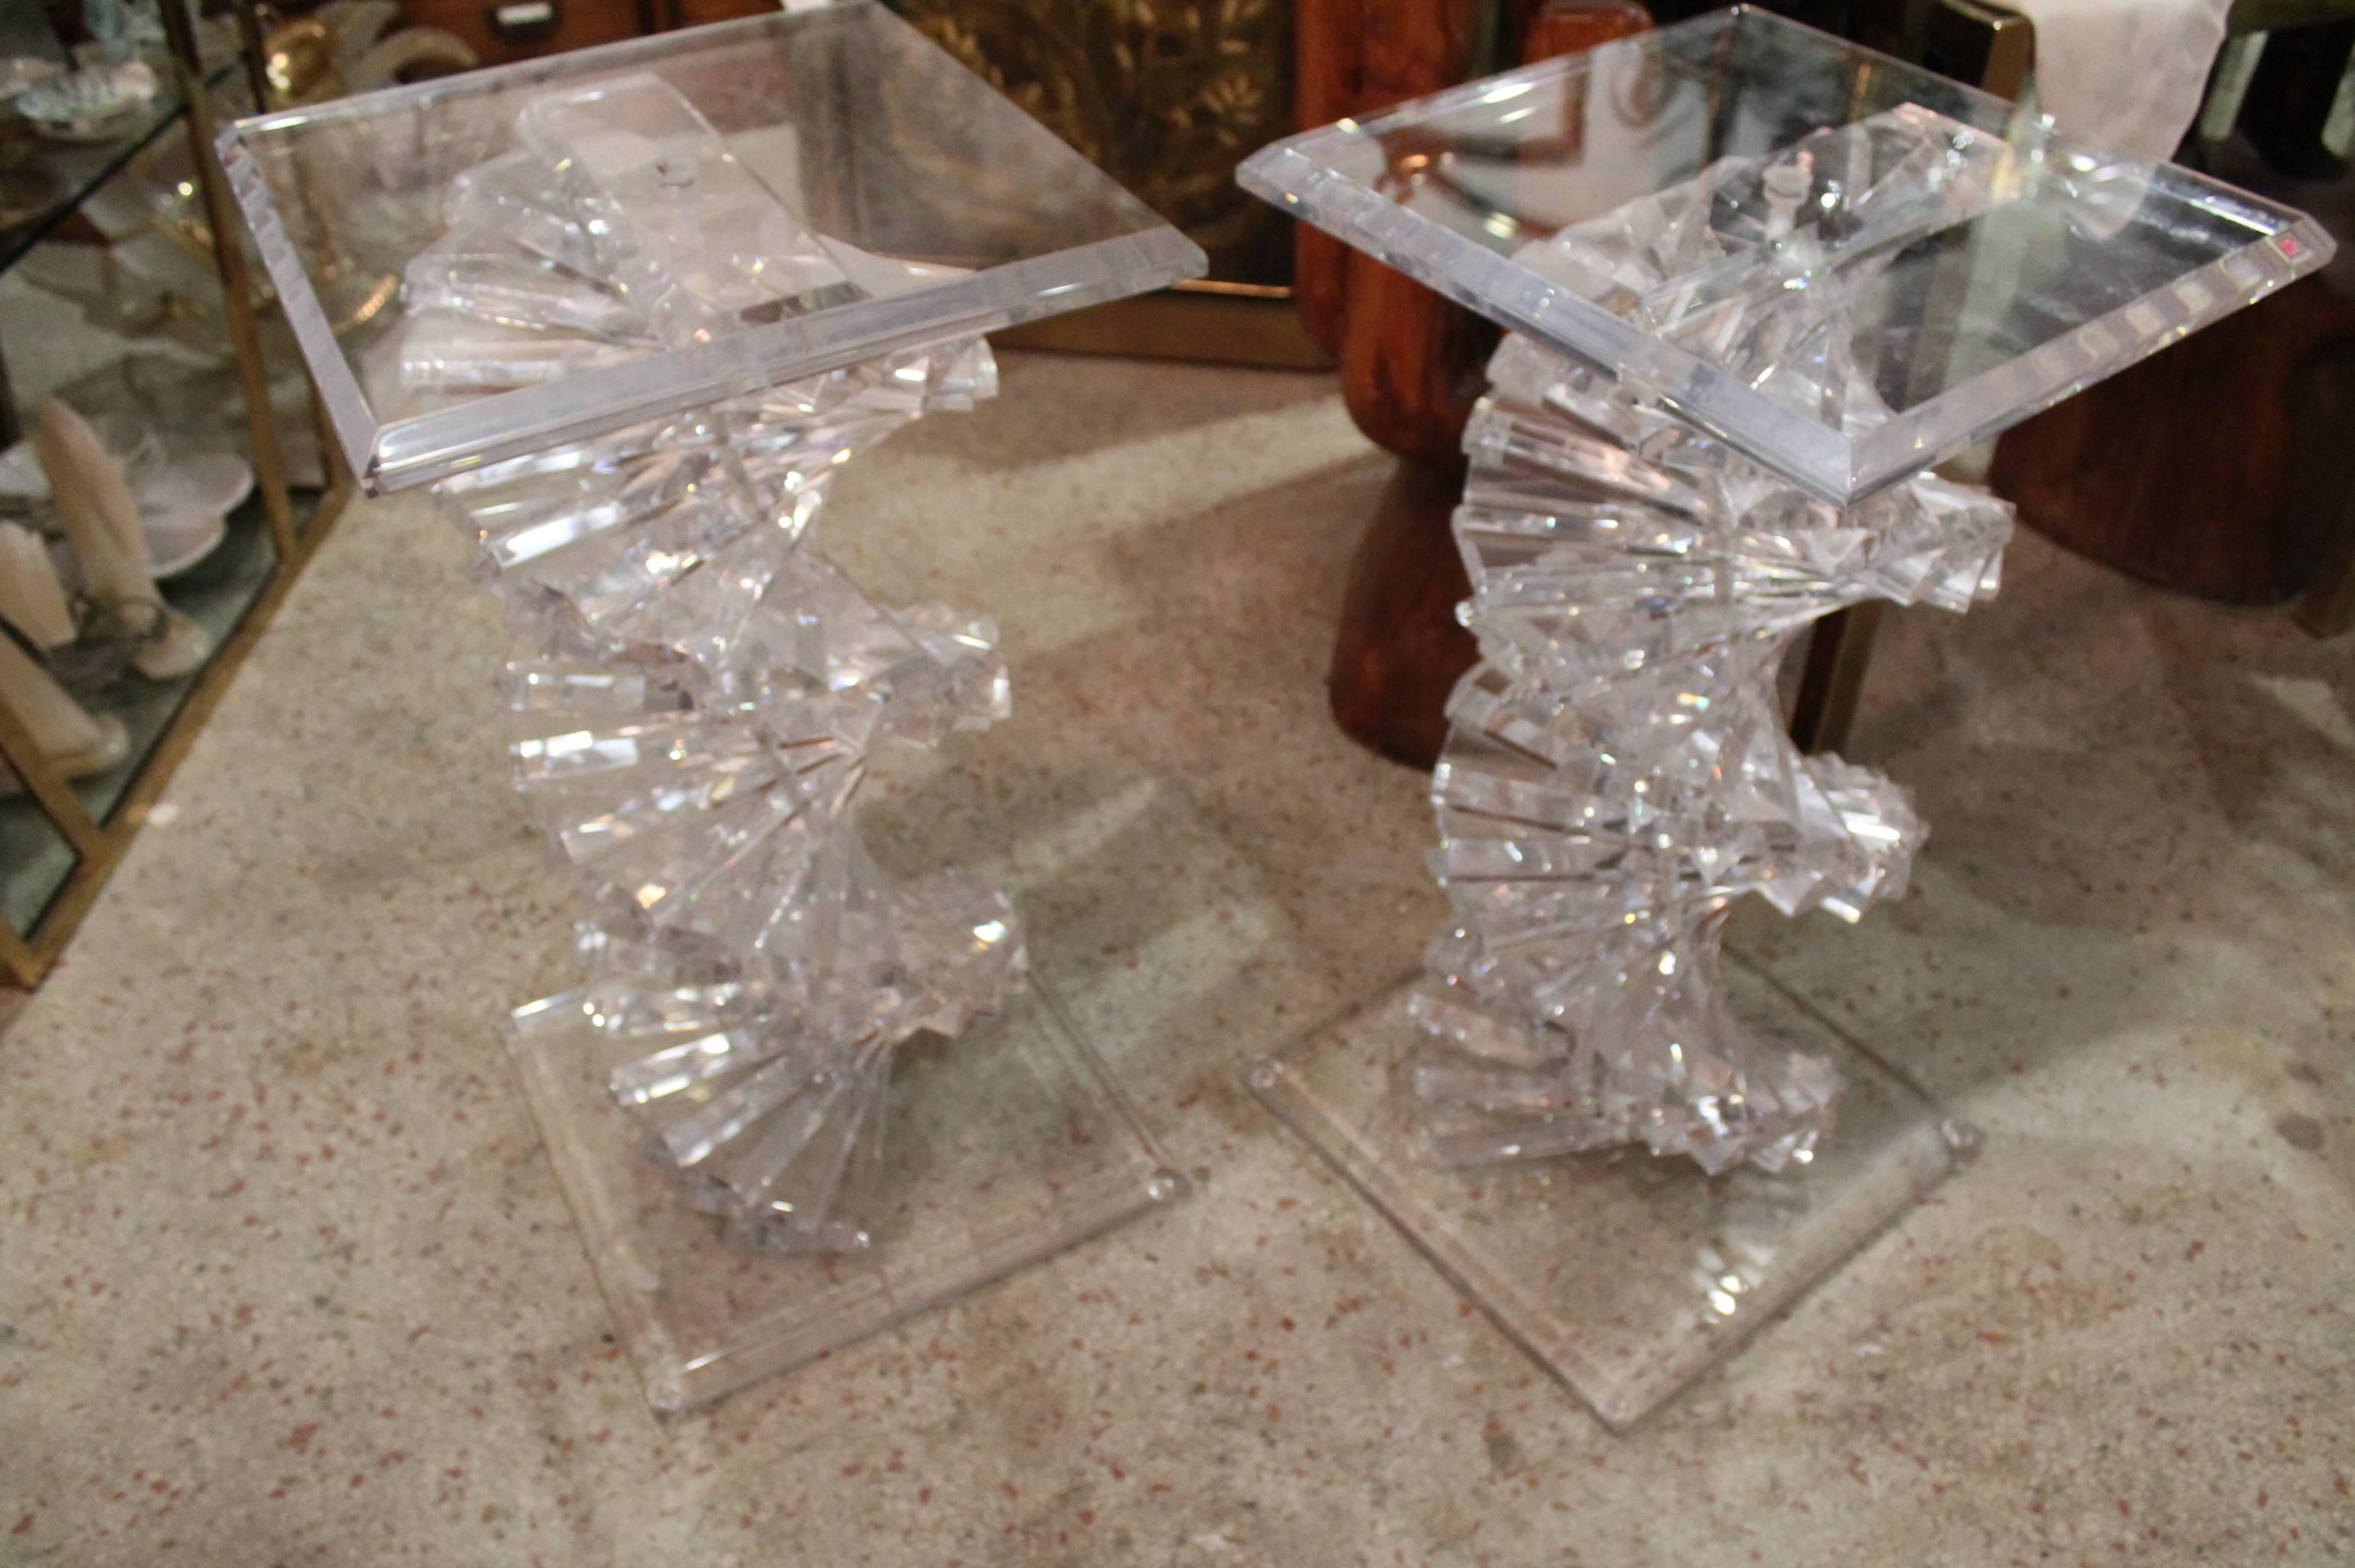 Pair of Lucite DNA spiral staircase table bases that can be used for a dining table, desk, console or as pedestals. Glass top not included.

In the manner of Karl Springer, Charles Hollis Jones. Vintage 